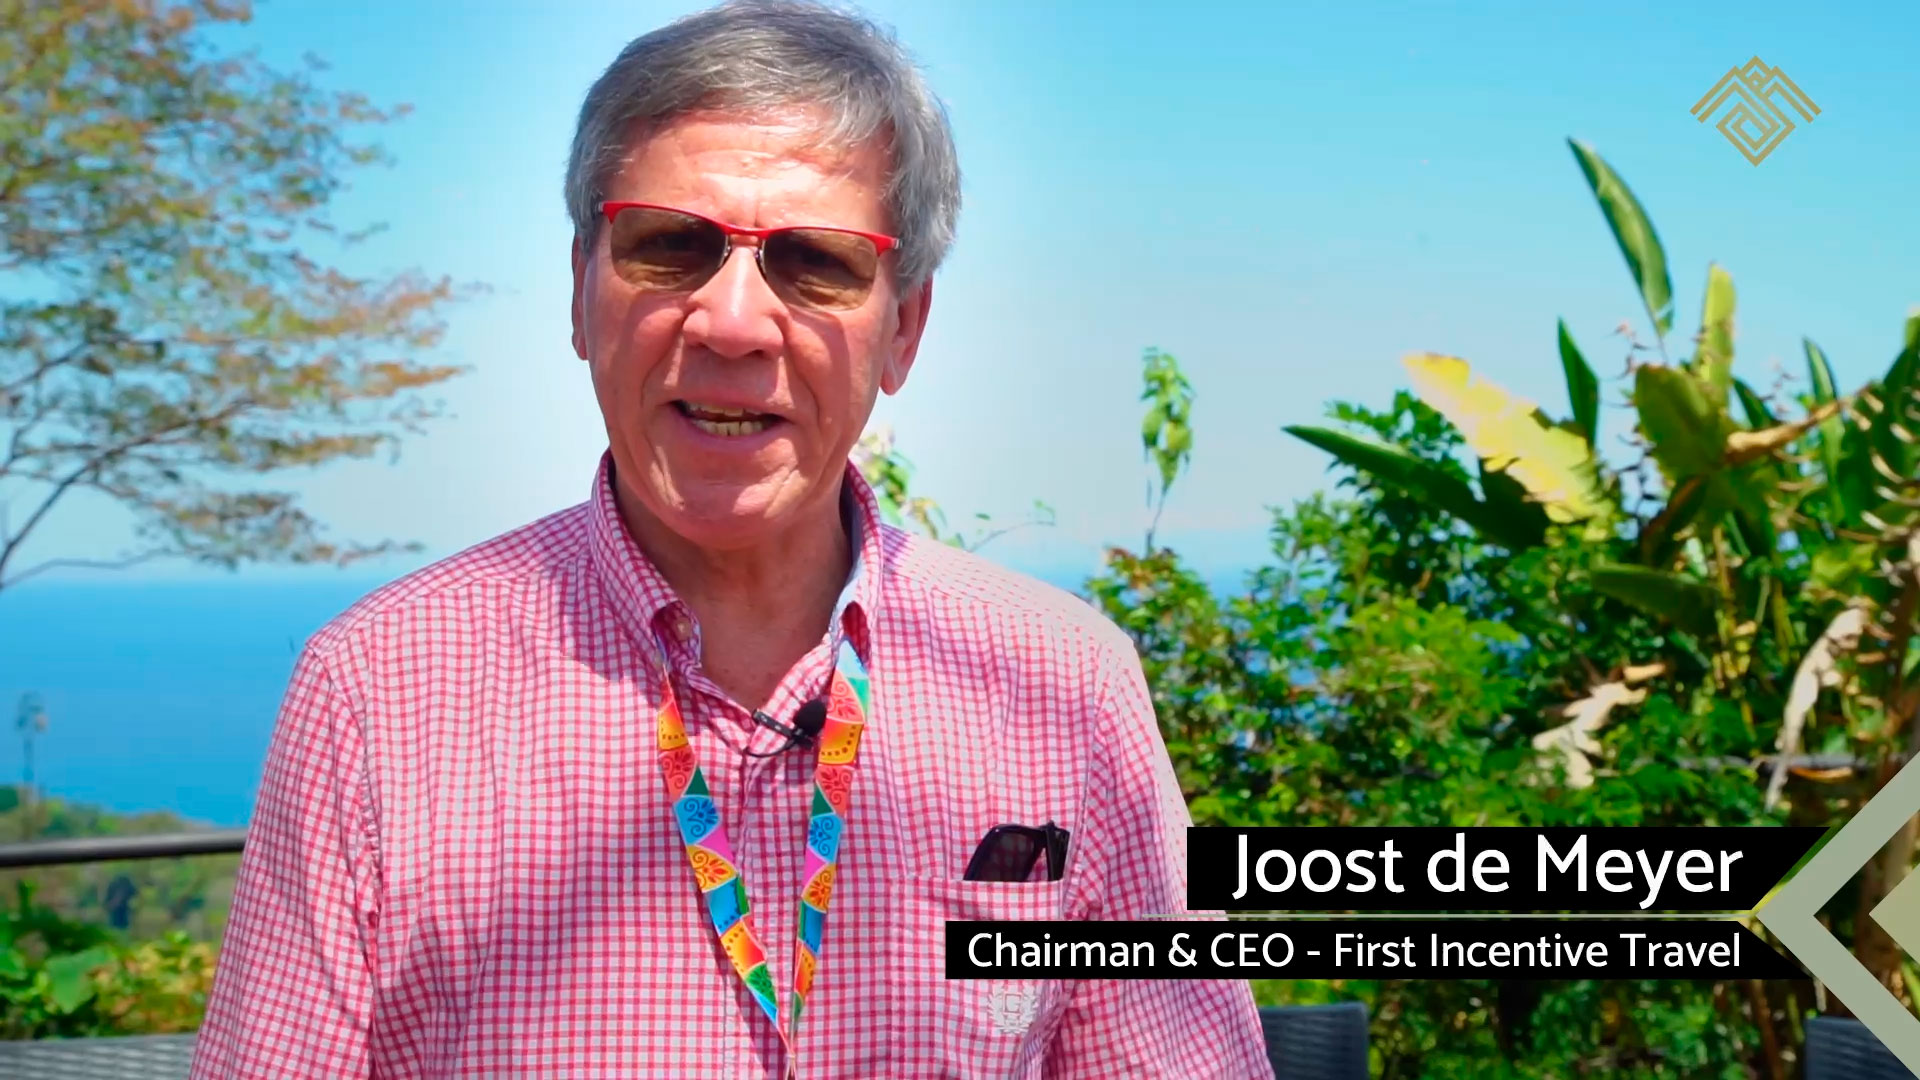 Joost de Meyer - Chairman & CEO - First Incentive Travel